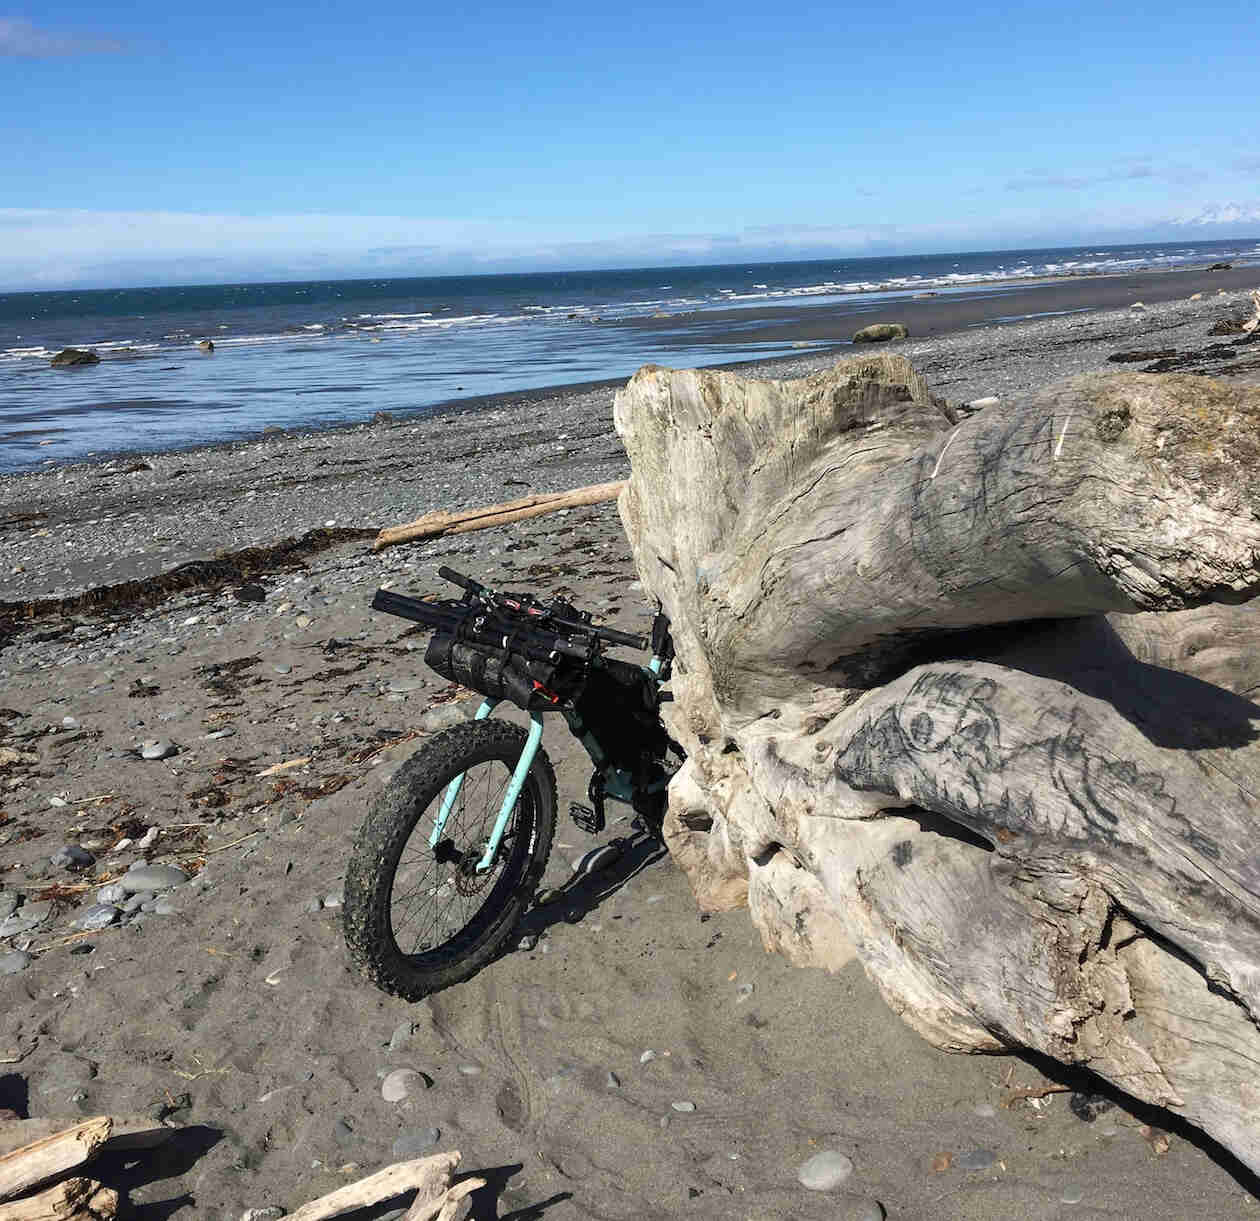 The front of a Surly fat bike sticks out from behind a large log, on a seashore, with water in the background